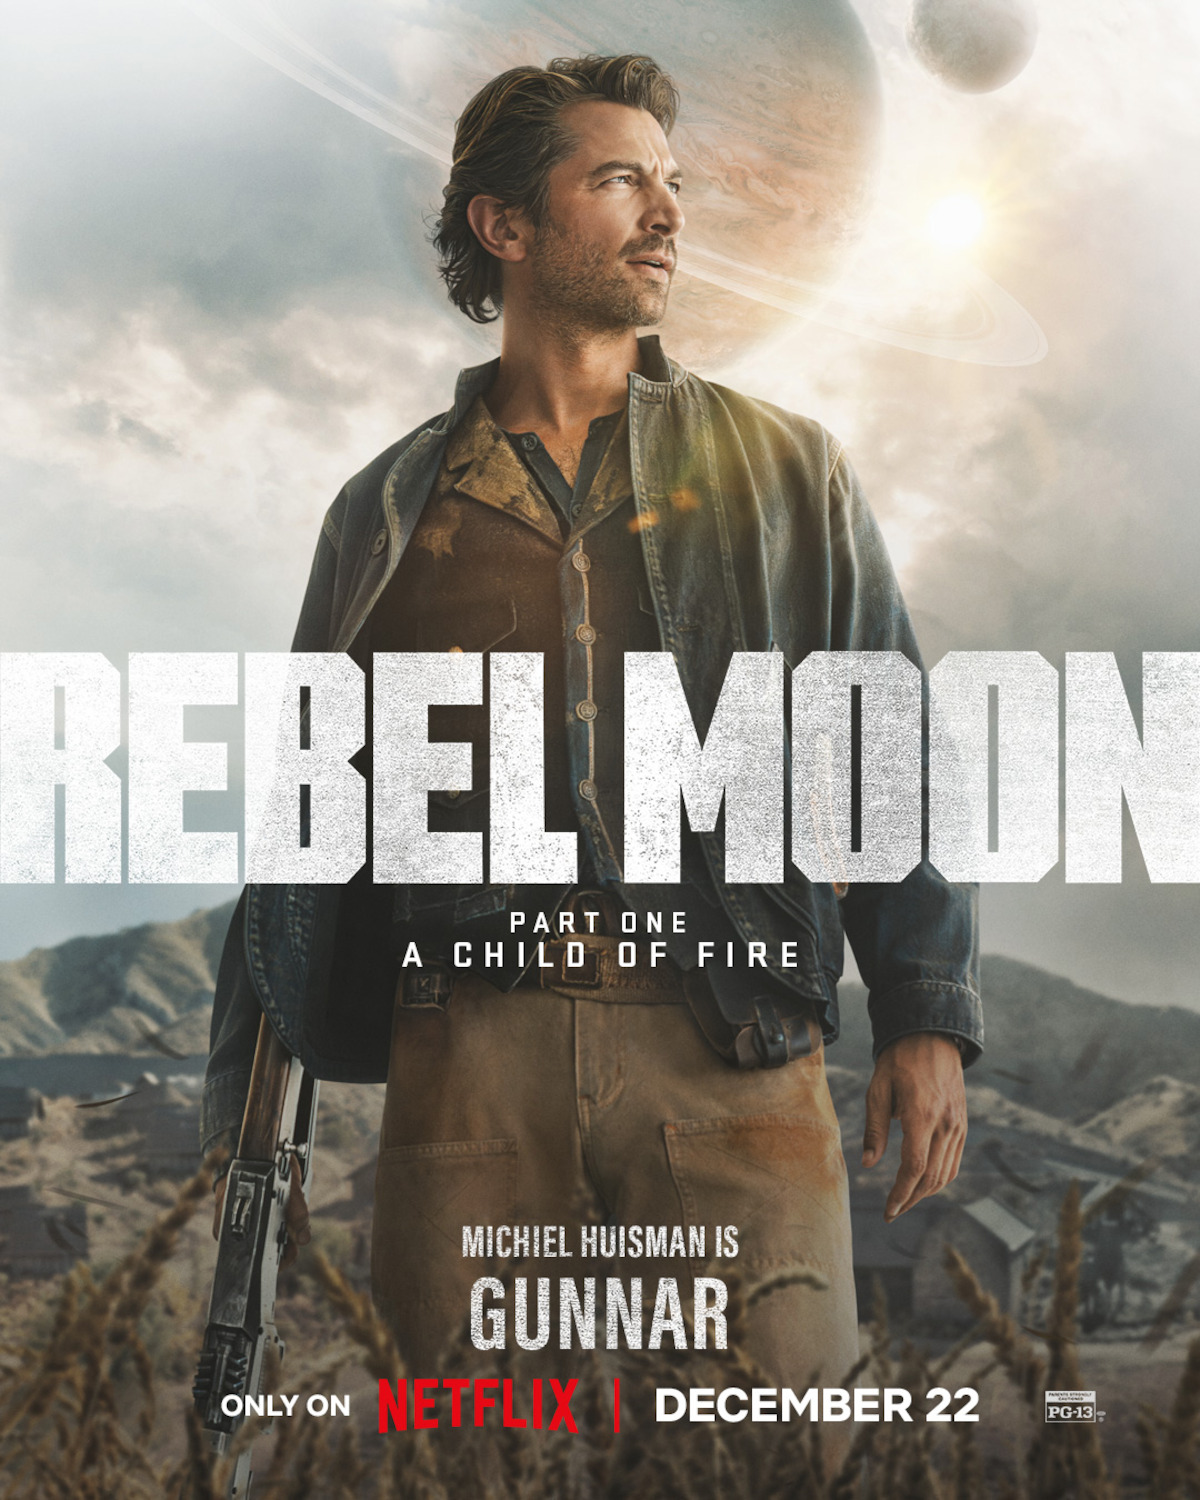 Zack Snyder's Rebel Moon Cast & Character Guide